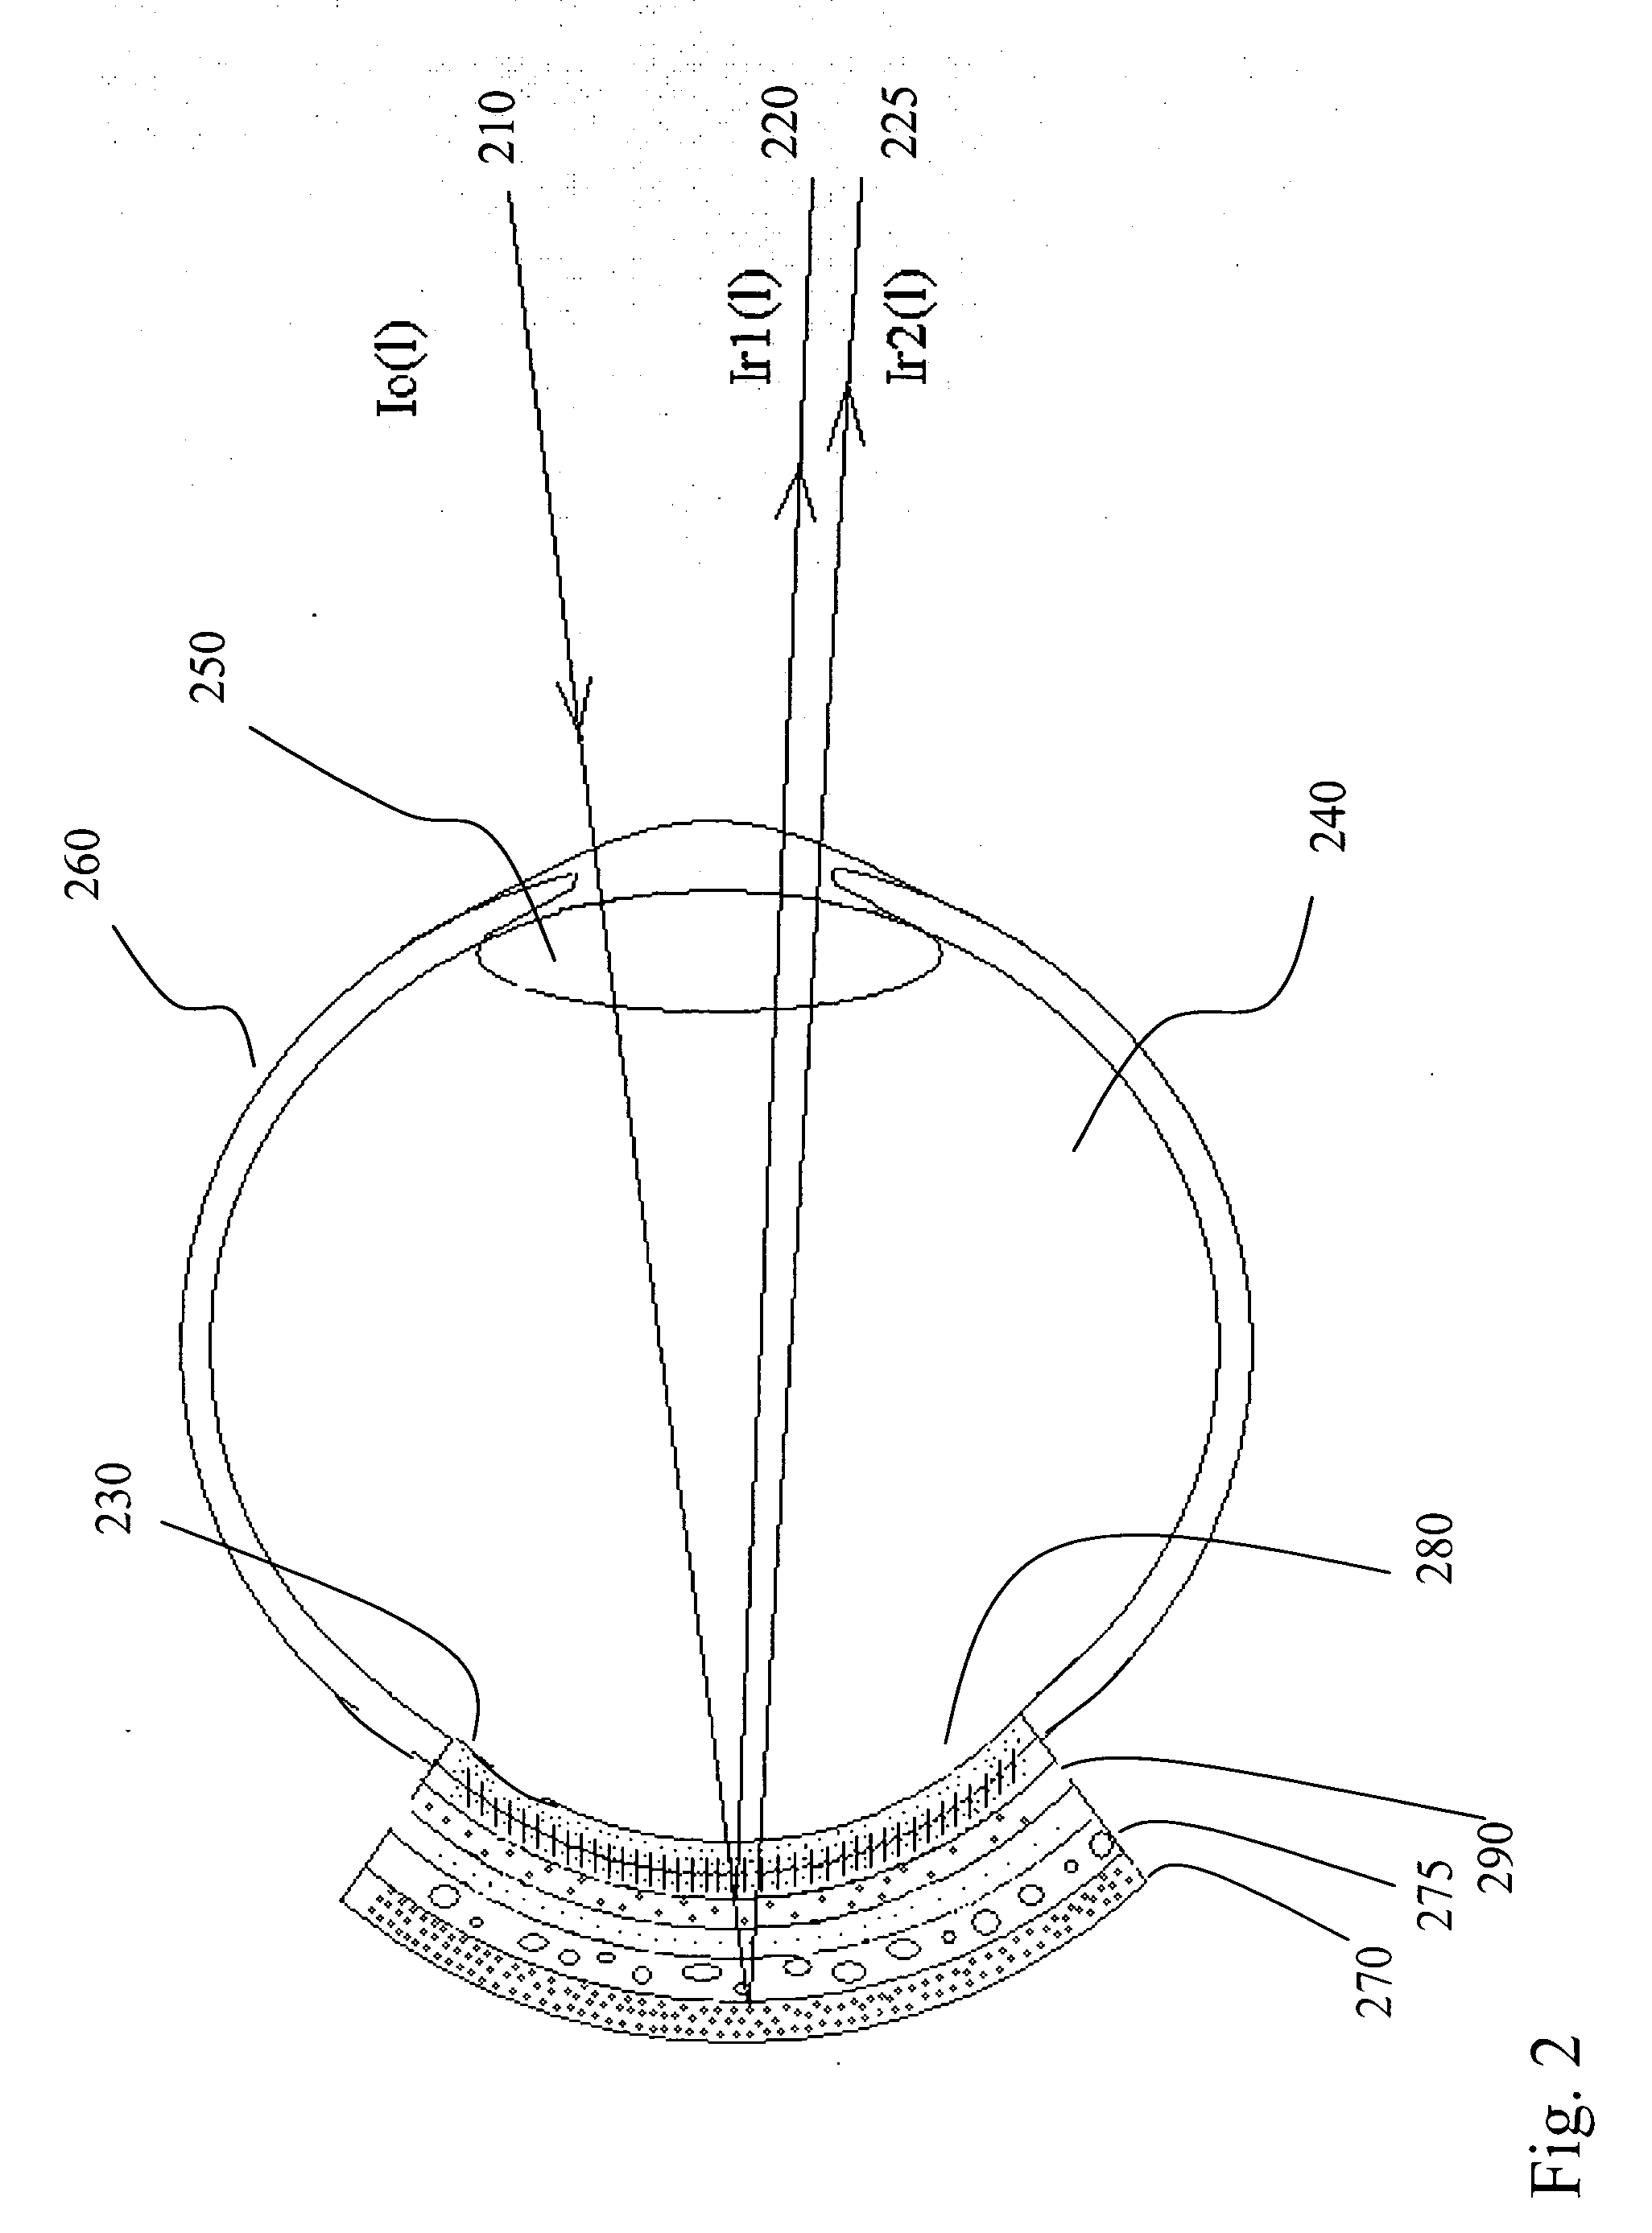 Method and apparatus for correlated ophthalmic measurements